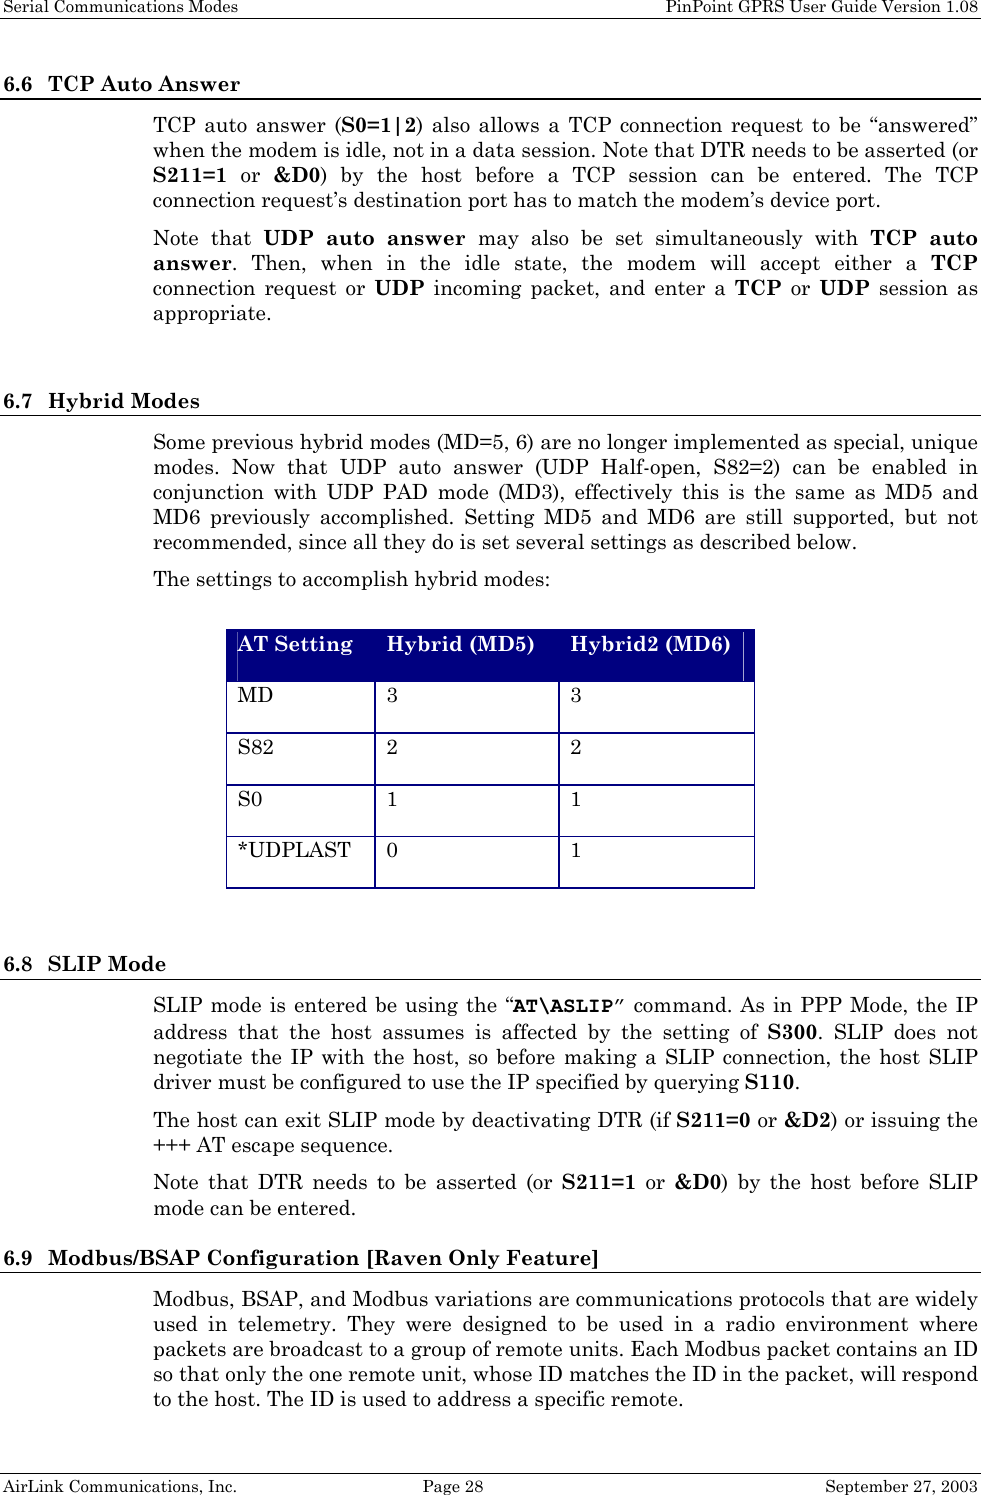 Serial Communications Modes    PinPoint GPRS User Guide Version 1.08 AirLink Communications, Inc.  Page 28  September 27, 2003 6.6 TCP Auto Answer TCP auto answer (S0=1|2) also allows a TCP connection request to be “answered” when the modem is idle, not in a data session. Note that DTR needs to be asserted (or S211=1 or &amp;D0) by the host before a TCP session can be entered. The TCP connection request’s destination port has to match the modem’s device port. Note that UDP auto answer may also be set simultaneously with TCP auto answer. Then, when in the idle state, the modem will accept either a TCP connection request or UDP incoming packet, and enter a TCP or UDP session as appropriate.  6.7 Hybrid Modes Some previous hybrid modes (MD=5, 6) are no longer implemented as special, unique modes. Now that UDP auto answer (UDP Half-open, S82=2) can be enabled in conjunction with UDP PAD mode (MD3), effectively this is the same as MD5 and MD6 previously accomplished. Setting MD5 and MD6 are still supported, but not recommended, since all they do is set several settings as described below. The settings to accomplish hybrid modes:  AT Setting Hybrid (MD5) Hybrid2 (MD6) MD 3 3 S82 2 2 S0 1 1 *UDPLAST 0 1  6.8 SLIP Mode SLIP mode is entered be using the “AT\ASLIP” command. As in PPP Mode, the IP address that the host assumes is affected by the setting of S300. SLIP does not negotiate the IP with the host, so before making a SLIP connection, the host SLIP driver must be configured to use the IP specified by querying S110. The host can exit SLIP mode by deactivating DTR (if S211=0 or &amp;D2) or issuing the +++ AT escape sequence. Note that DTR needs to be asserted (or S211=1 or &amp;D0) by the host before SLIP mode can be entered. 6.9 Modbus/BSAP Configuration [Raven Only Feature] Modbus, BSAP, and Modbus variations are communications protocols that are widely used in telemetry. They were designed to be used in a radio environment where packets are broadcast to a group of remote units. Each Modbus packet contains an ID so that only the one remote unit, whose ID matches the ID in the packet, will respond to the host. The ID is used to address a specific remote. 